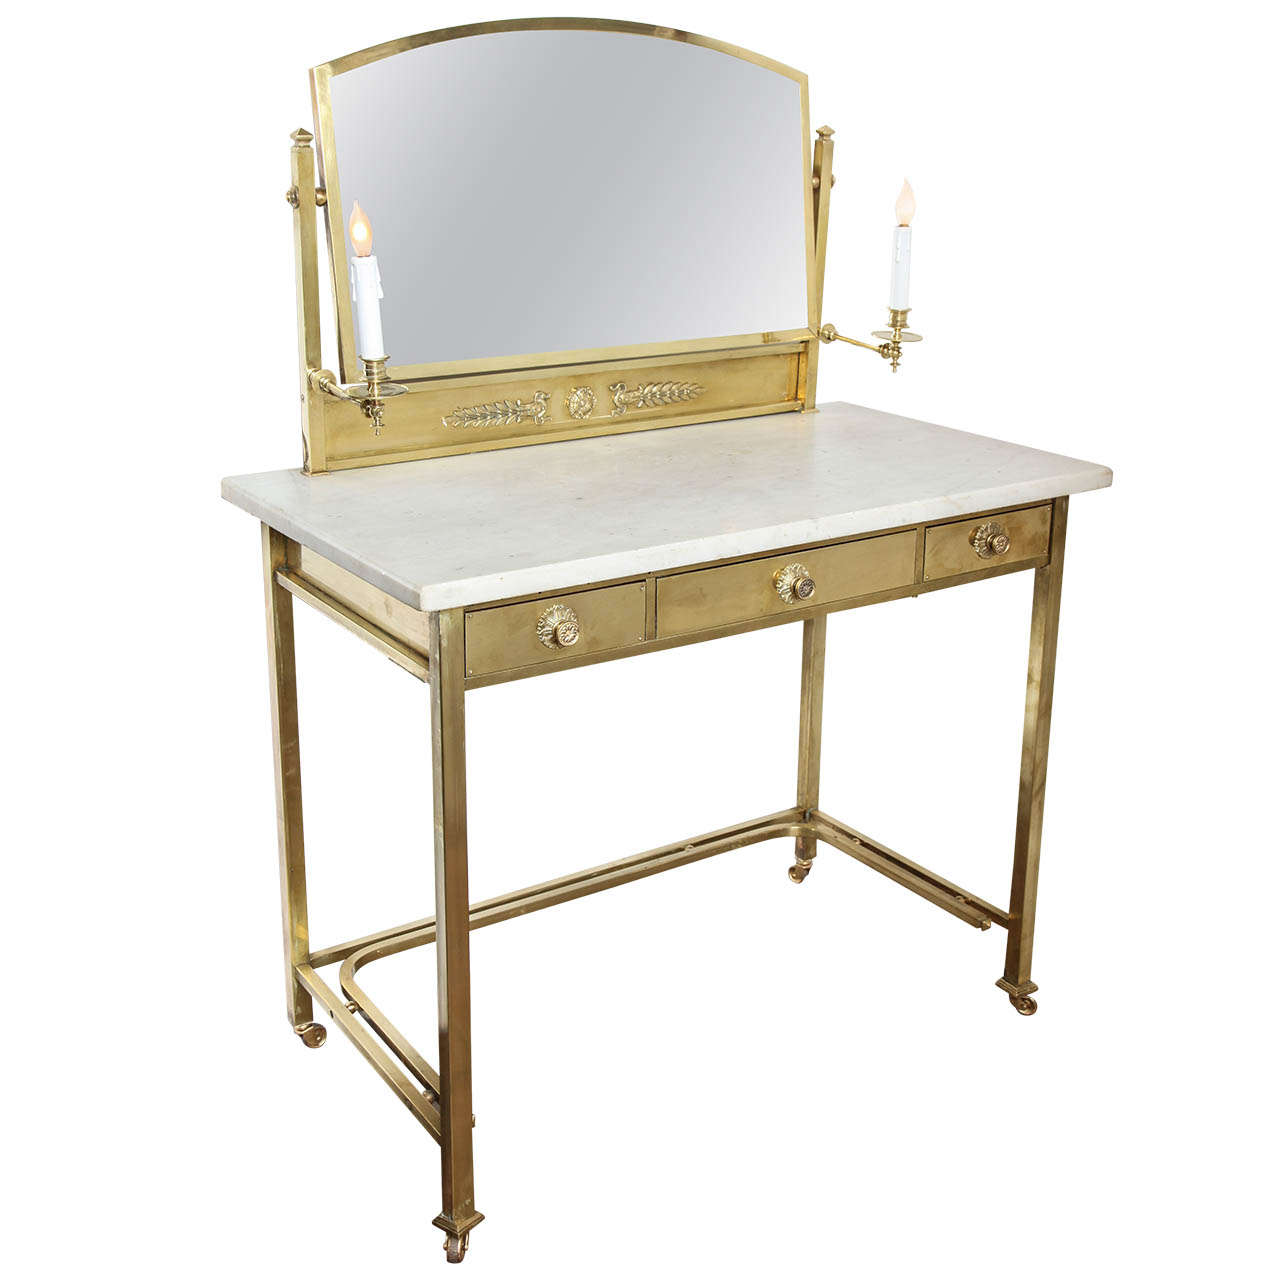 Masion Jansen Neoclassical Style Marble Top Mirrored Vanity Table